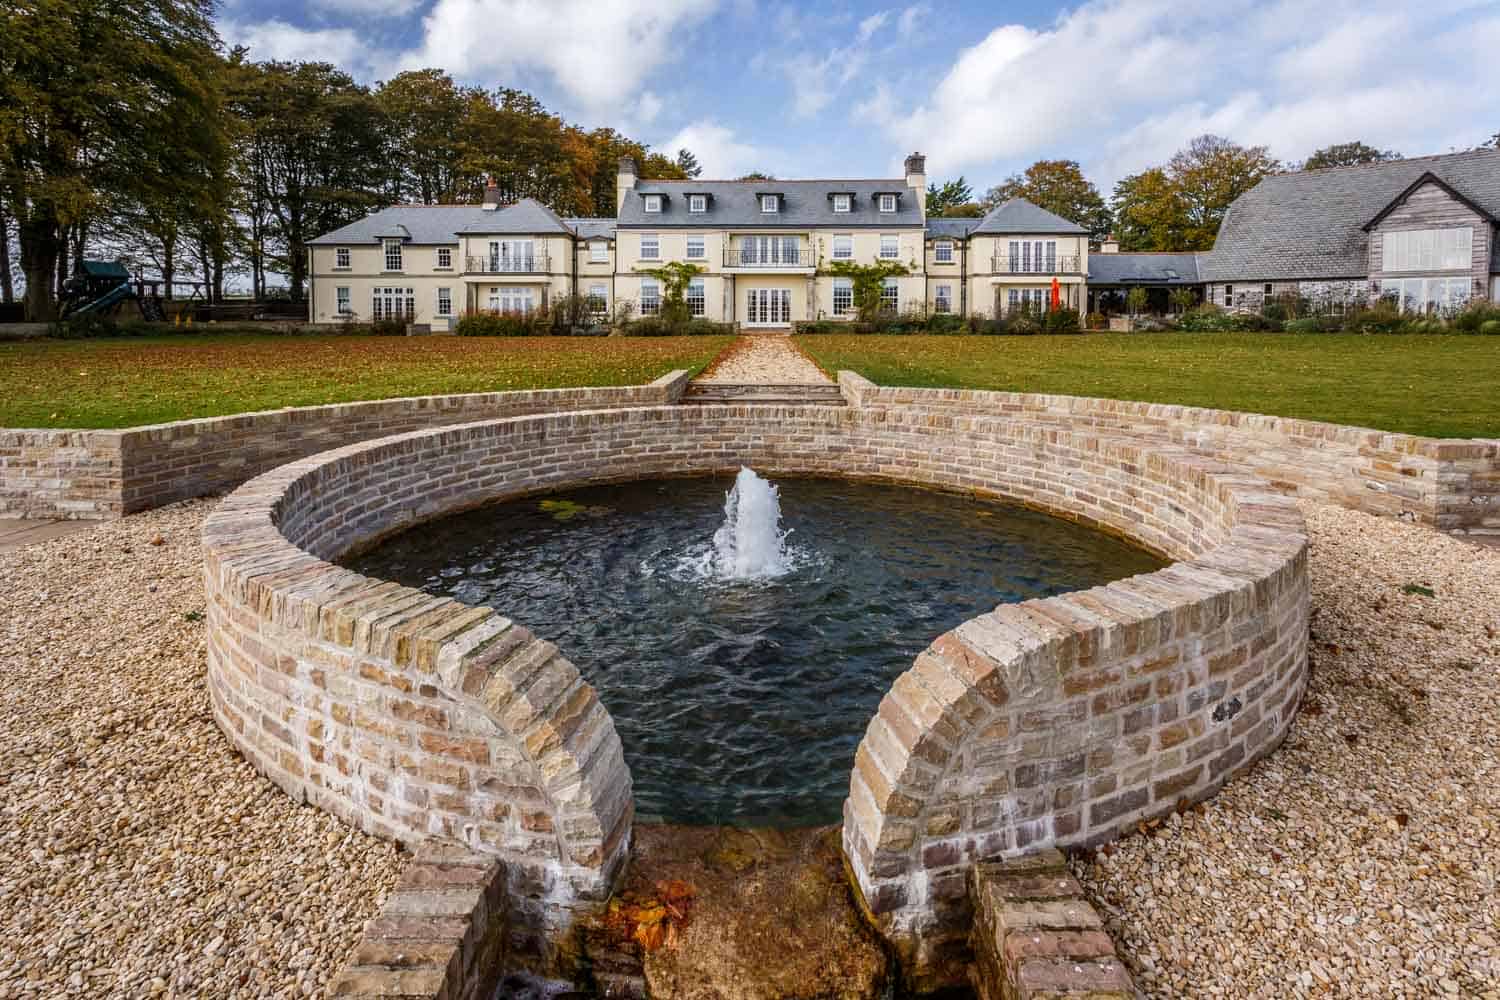  Photo of a stunning country residence in Dorset by Rick McEvoy Photography 